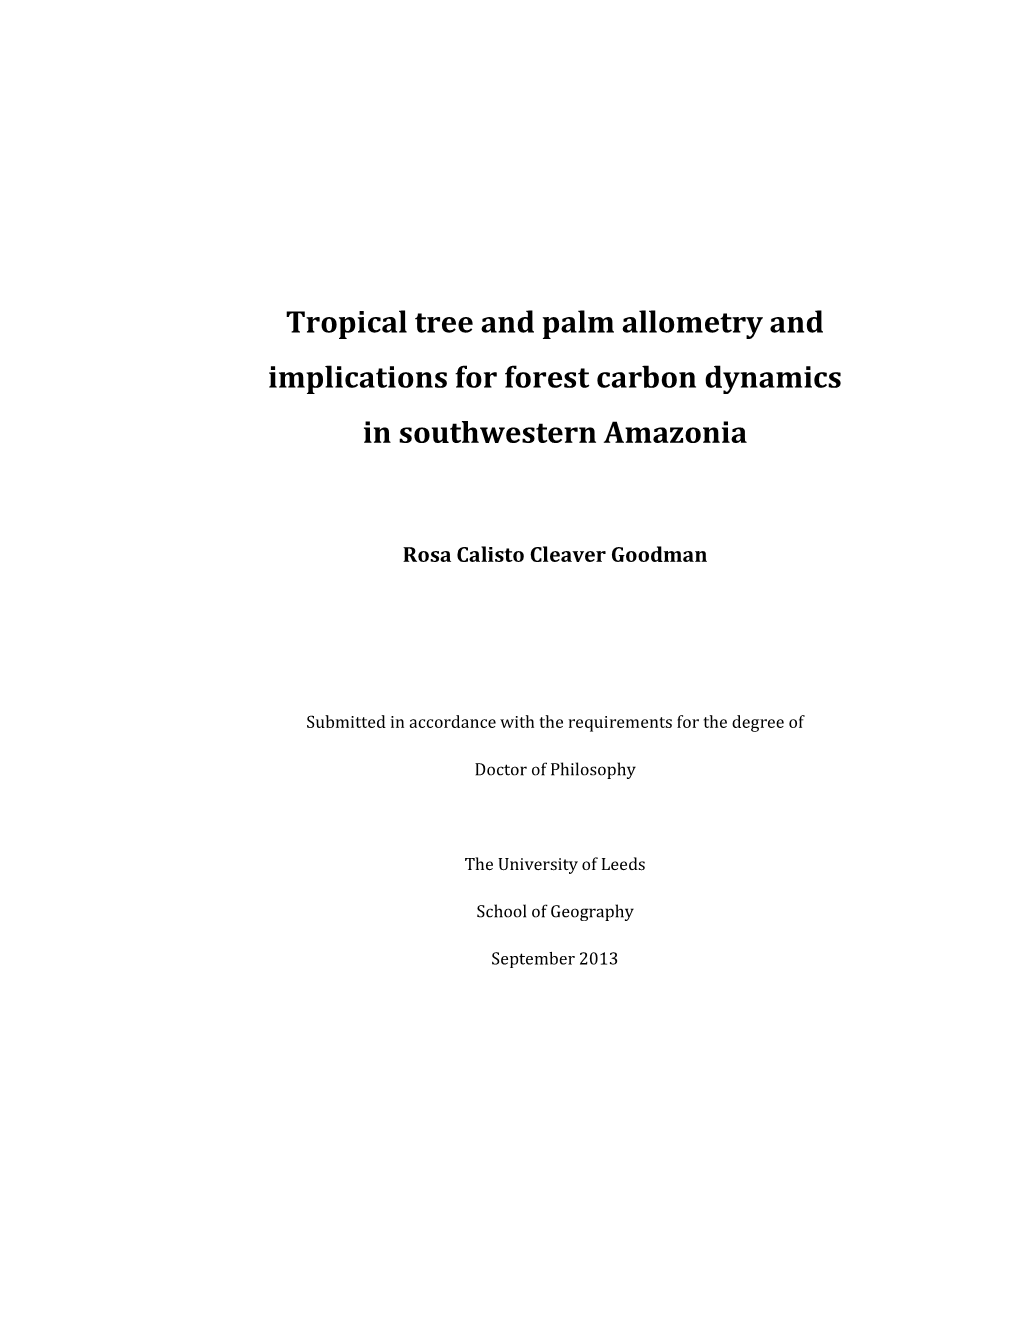 Tropical Tree and Palm Allometry and Implications for Forest Carbon Dynamics in Southwestern Amazonia